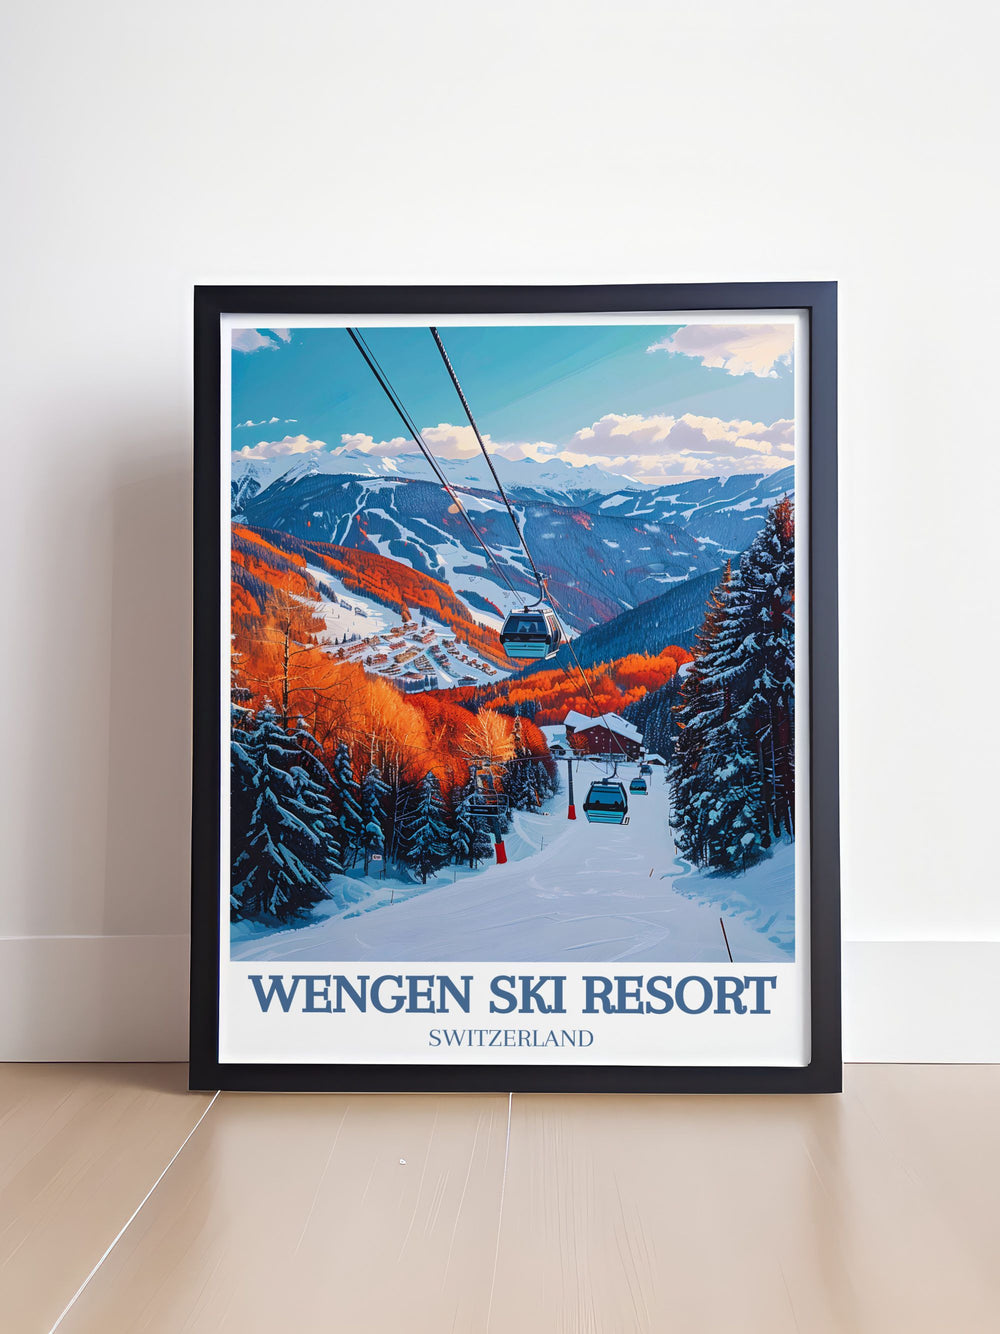 Modern wall decor featuring Wengen Ski Resort, Switzerland. This print highlights the resorts stunning alpine scenery and serene atmosphere, ideal for adding a contemporary touch of natures elegance to your living space.